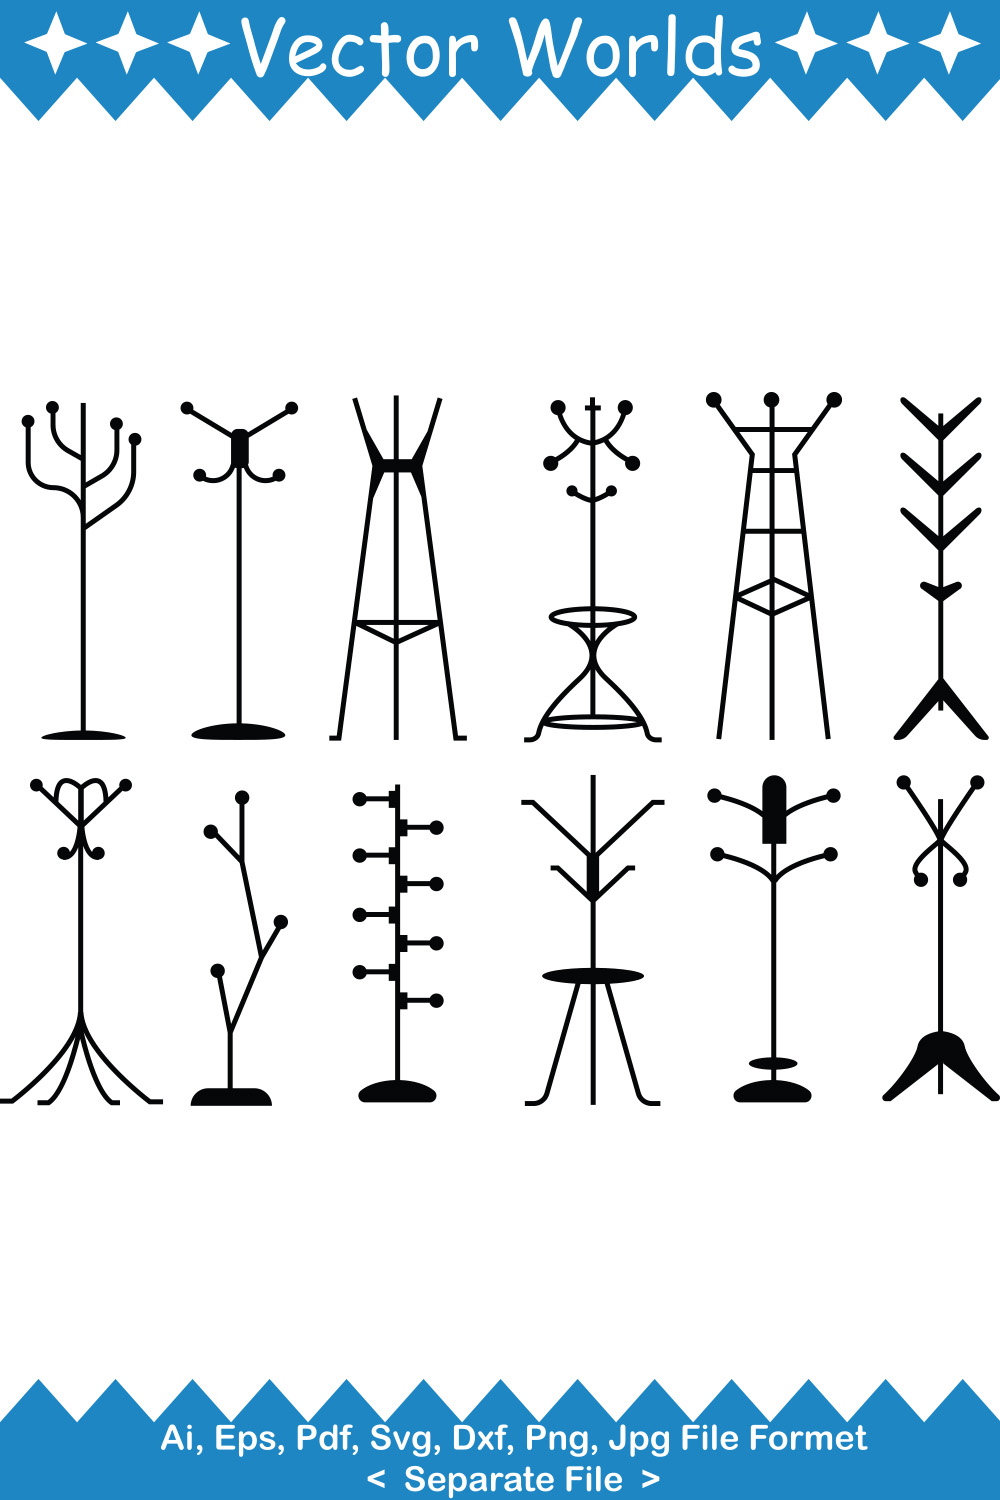 Set of beautiful vector images of coat stand silhouettes